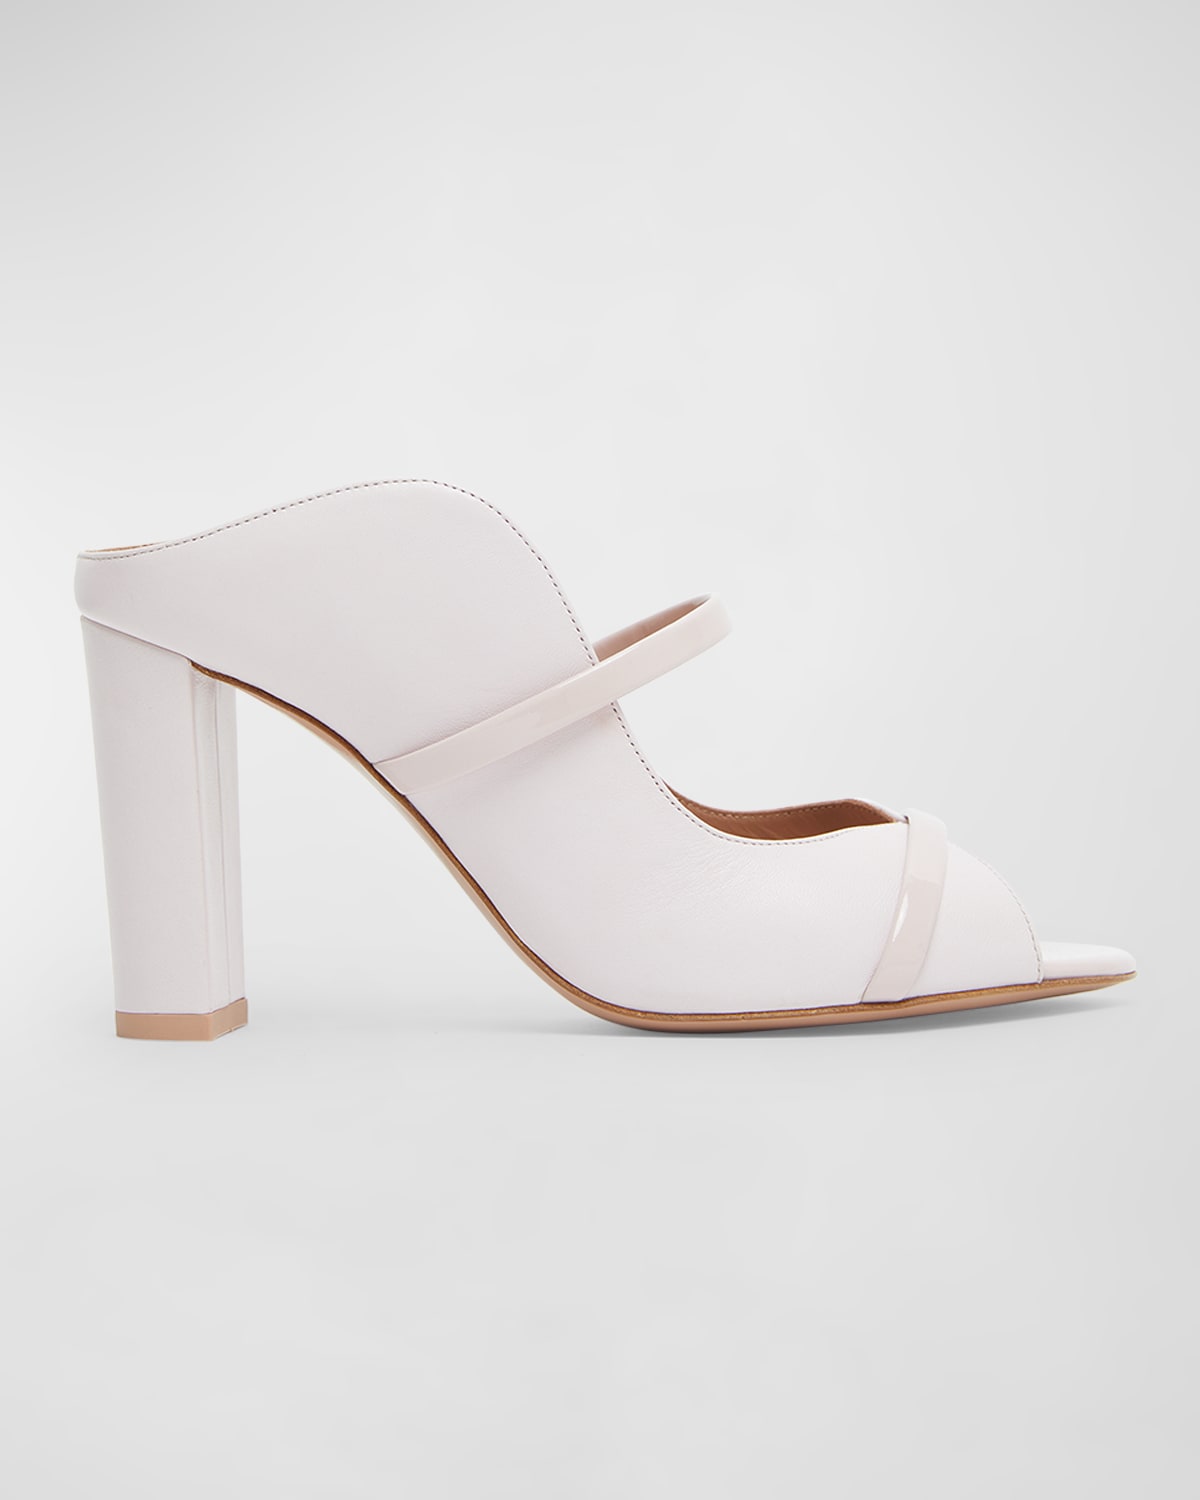 Norah Leather Two-Band Slide Sandals